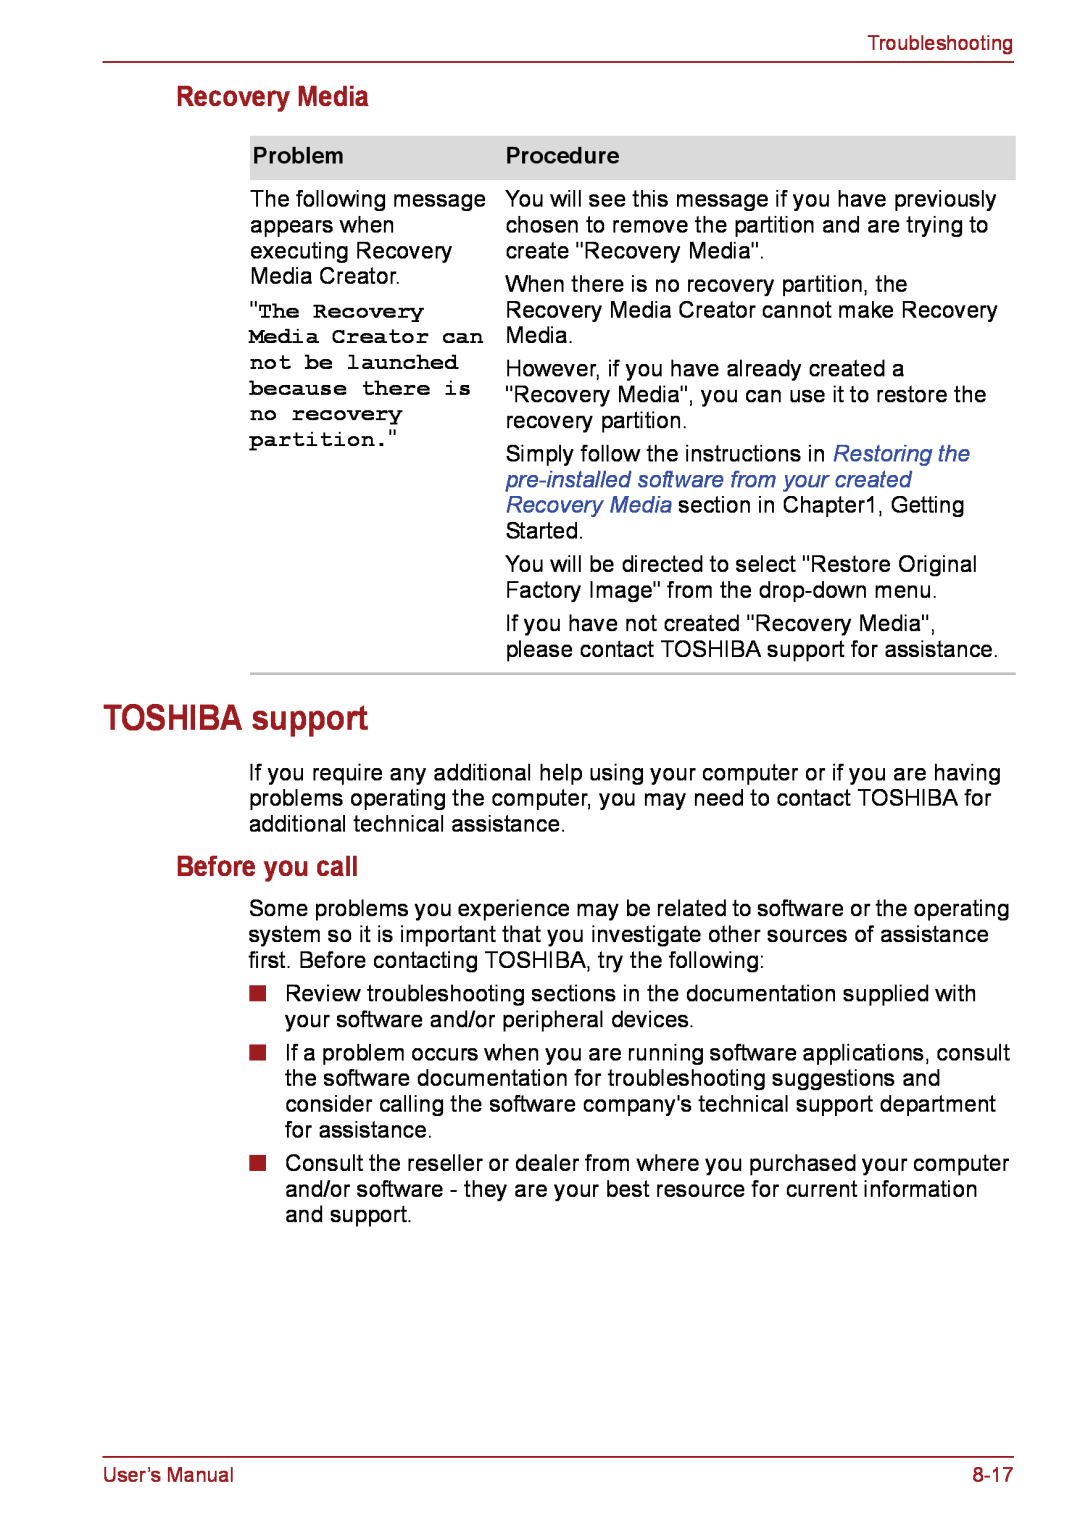 Toshiba PSC08U-02D01D user manual TOSHIBA support, Recovery Media, Before you call, The Recovery, ProblemProcedure 